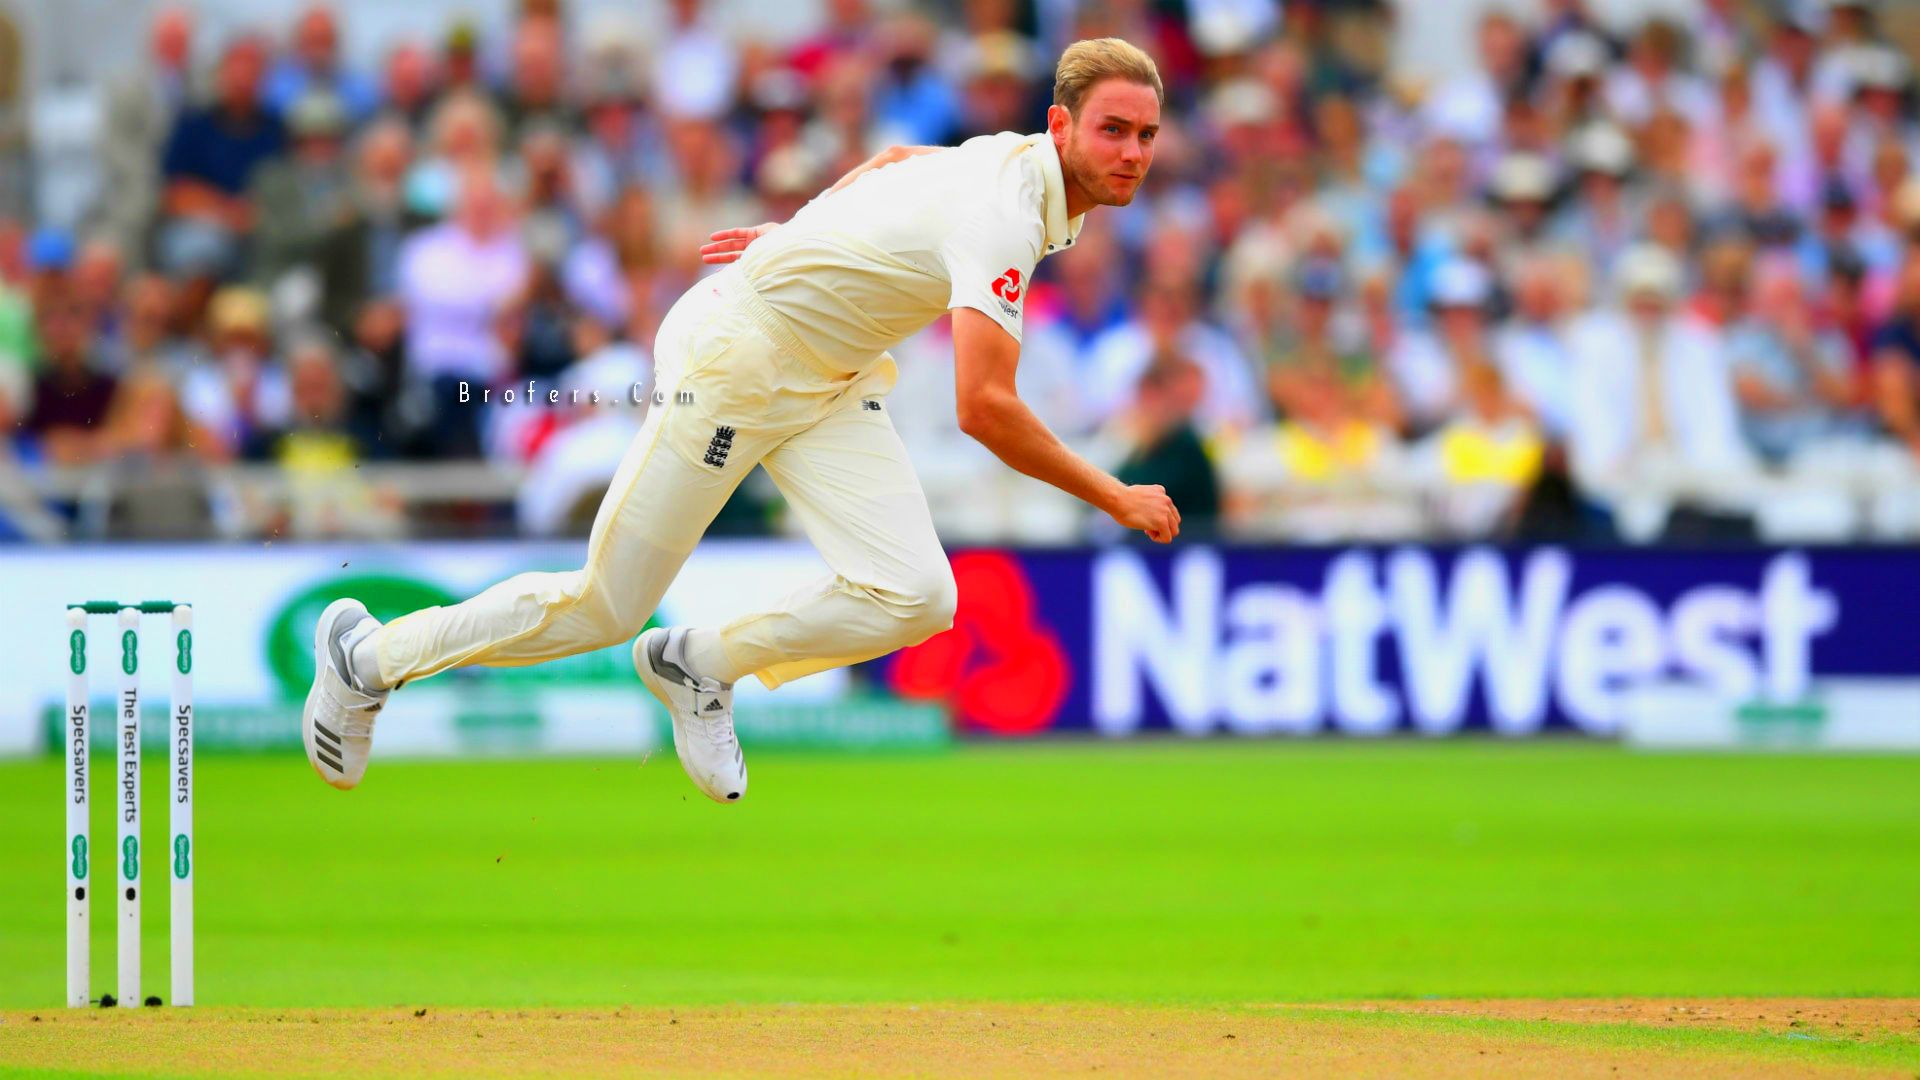 Stuart Broad Cricket Latest HD Free Picture, Image And Wallpaper 2020 2021